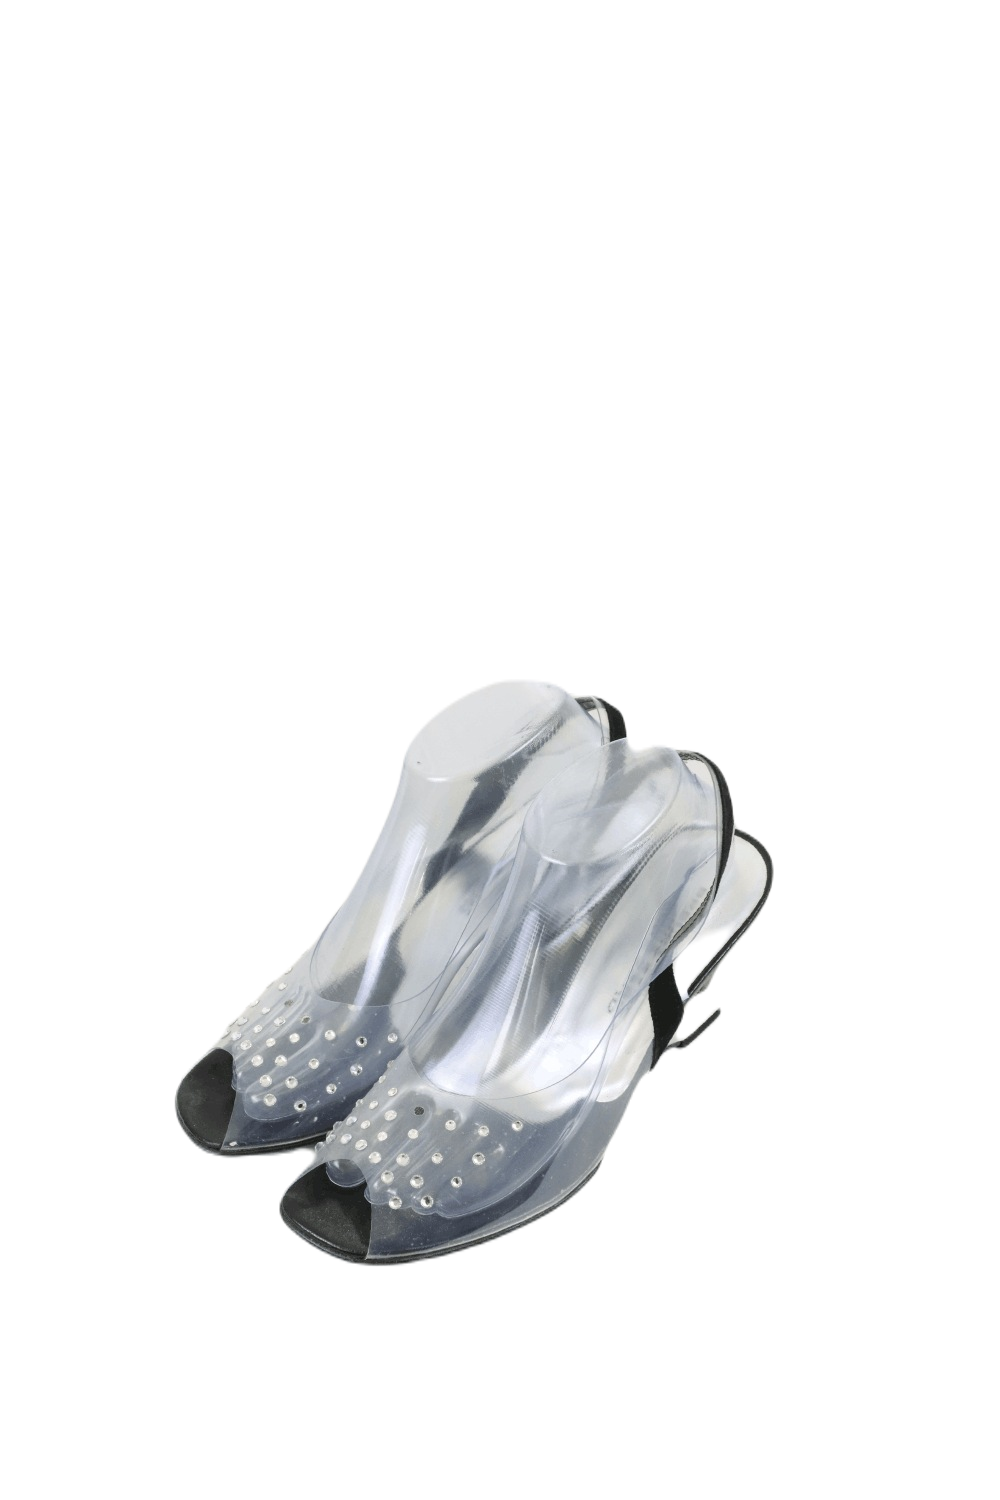 Brenda Zaro Clear Wedges With Sparkles 9